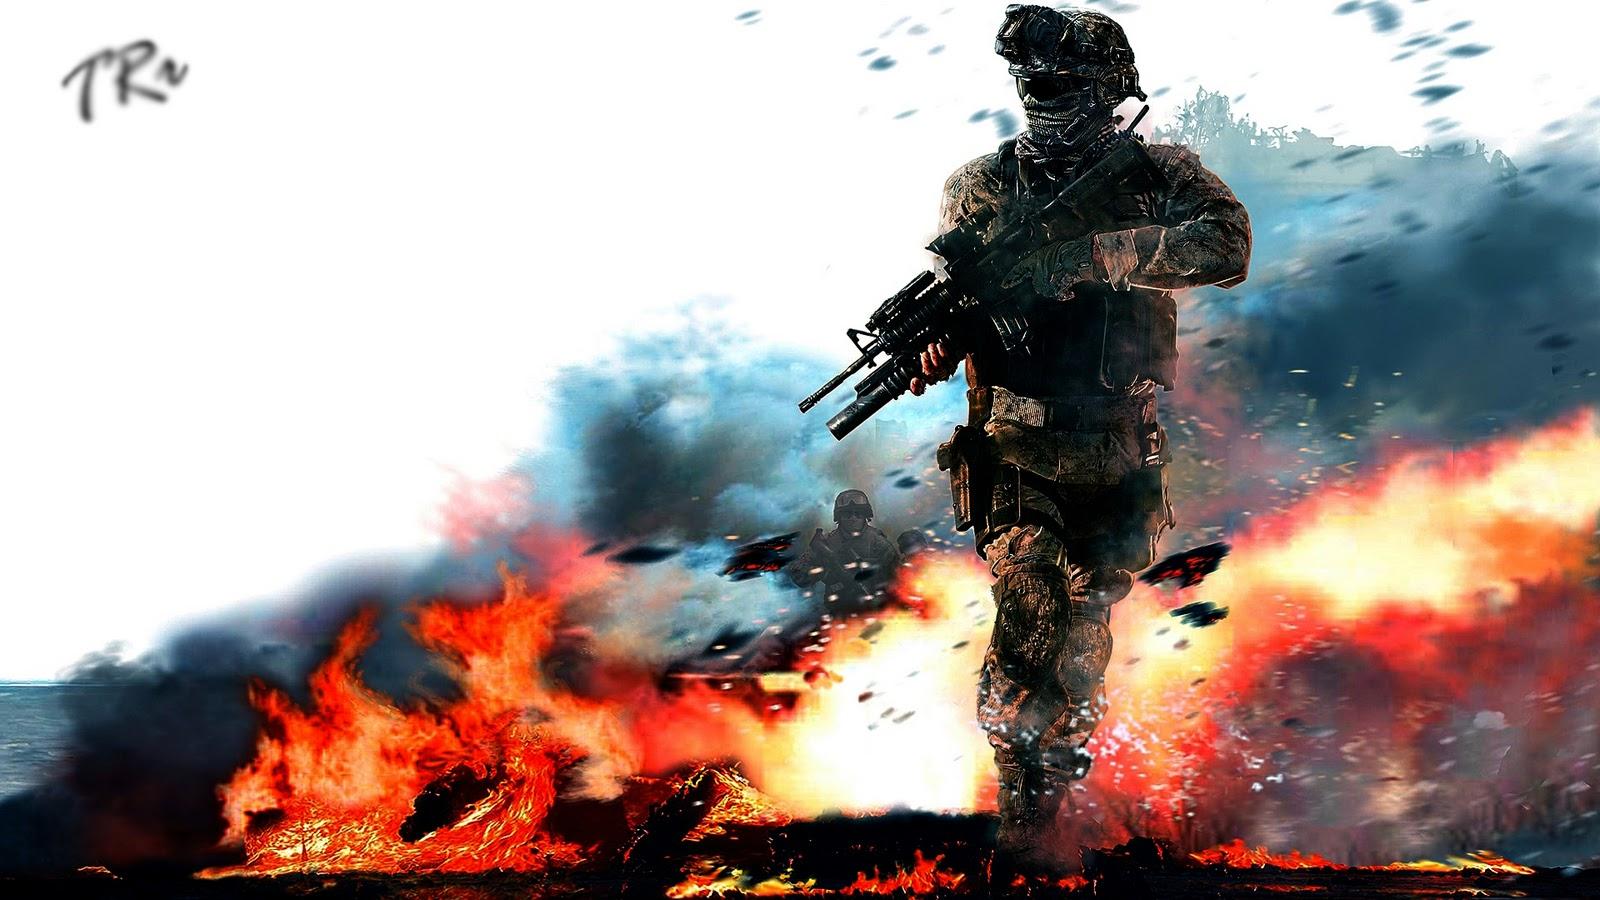 Call of Duty Background for Desktop